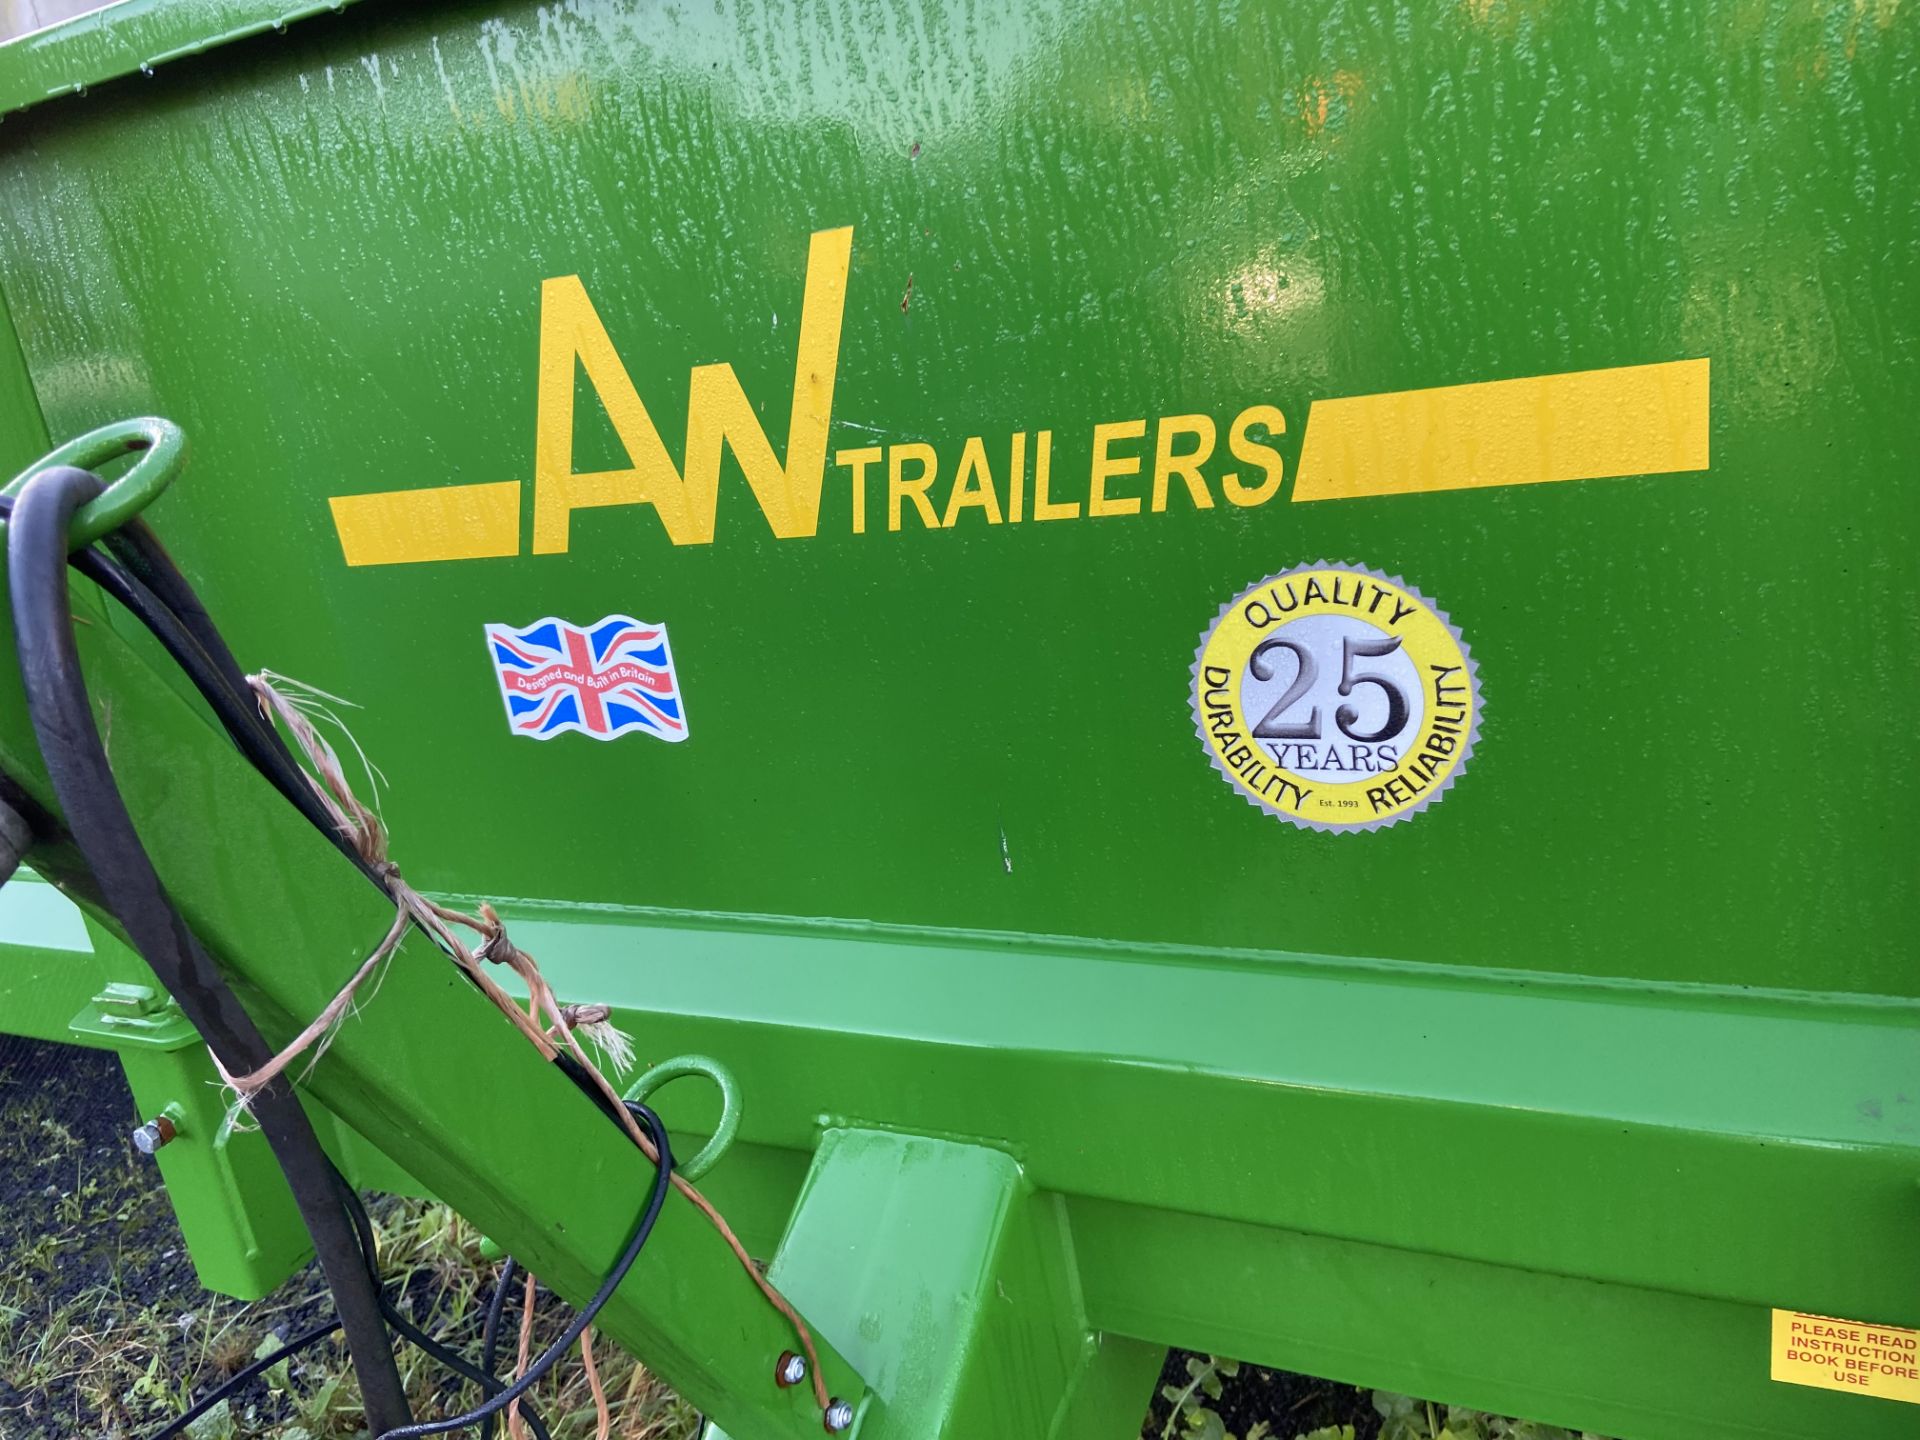 2020 FLATBED AW BALE TRAILER - Image 8 of 14